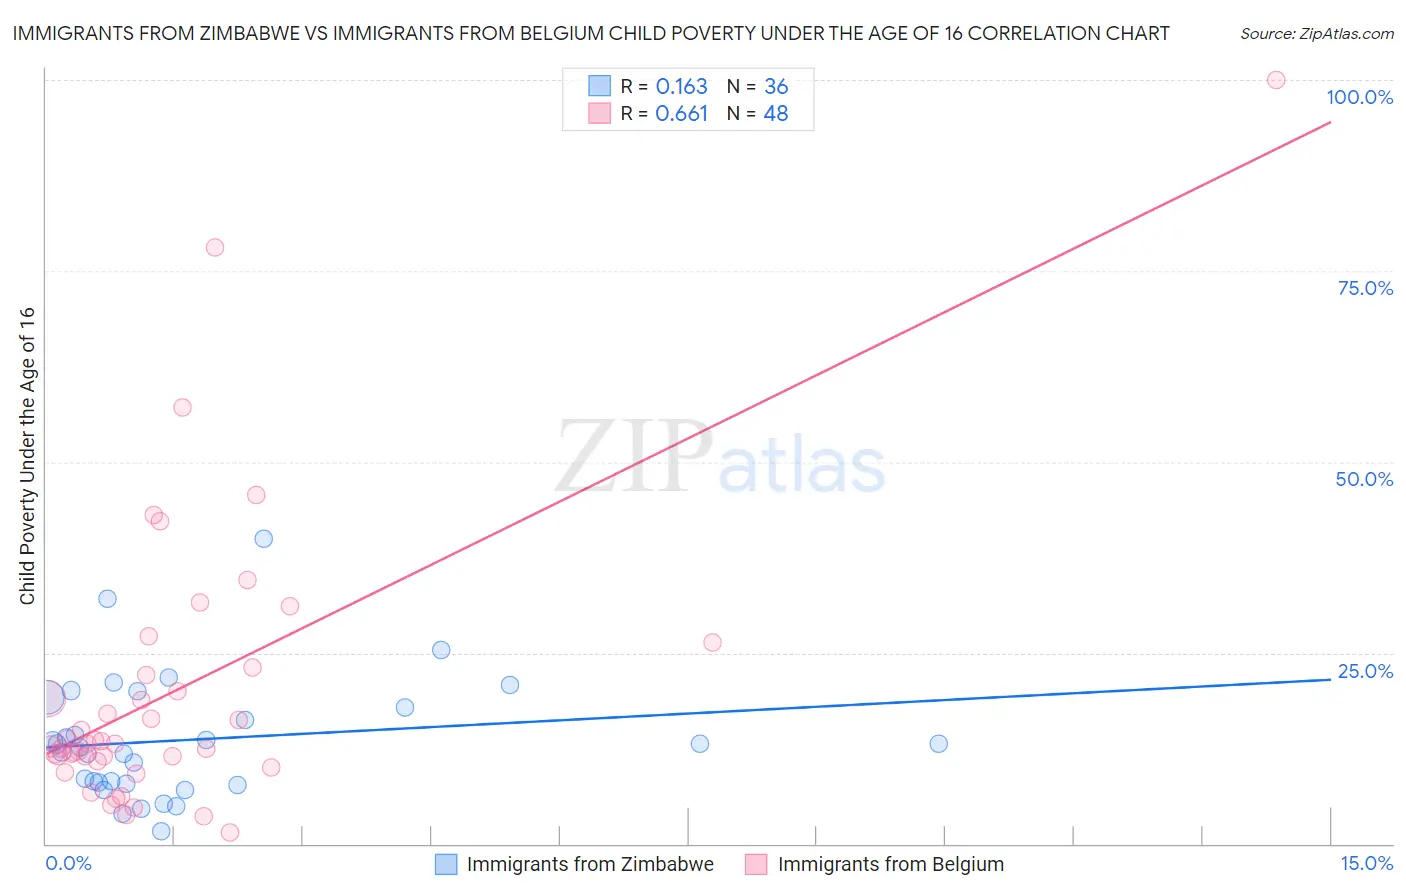 Immigrants from Zimbabwe vs Immigrants from Belgium Child Poverty Under the Age of 16